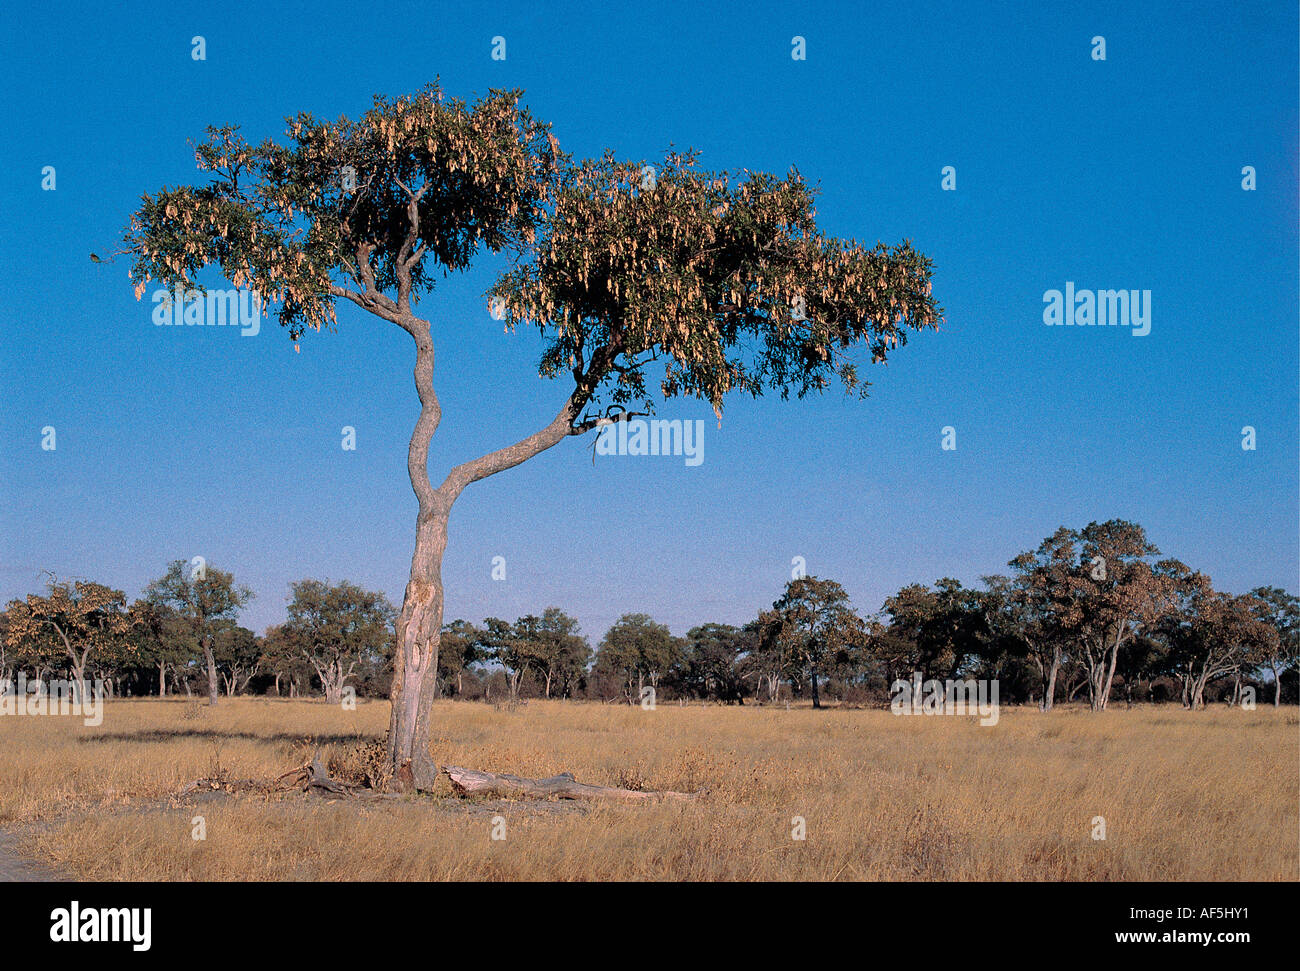 Isolated Mopane tree with seed pods seen against a blue sky Savuti South Chobe National Park Botswana southern Africa Stock Photo